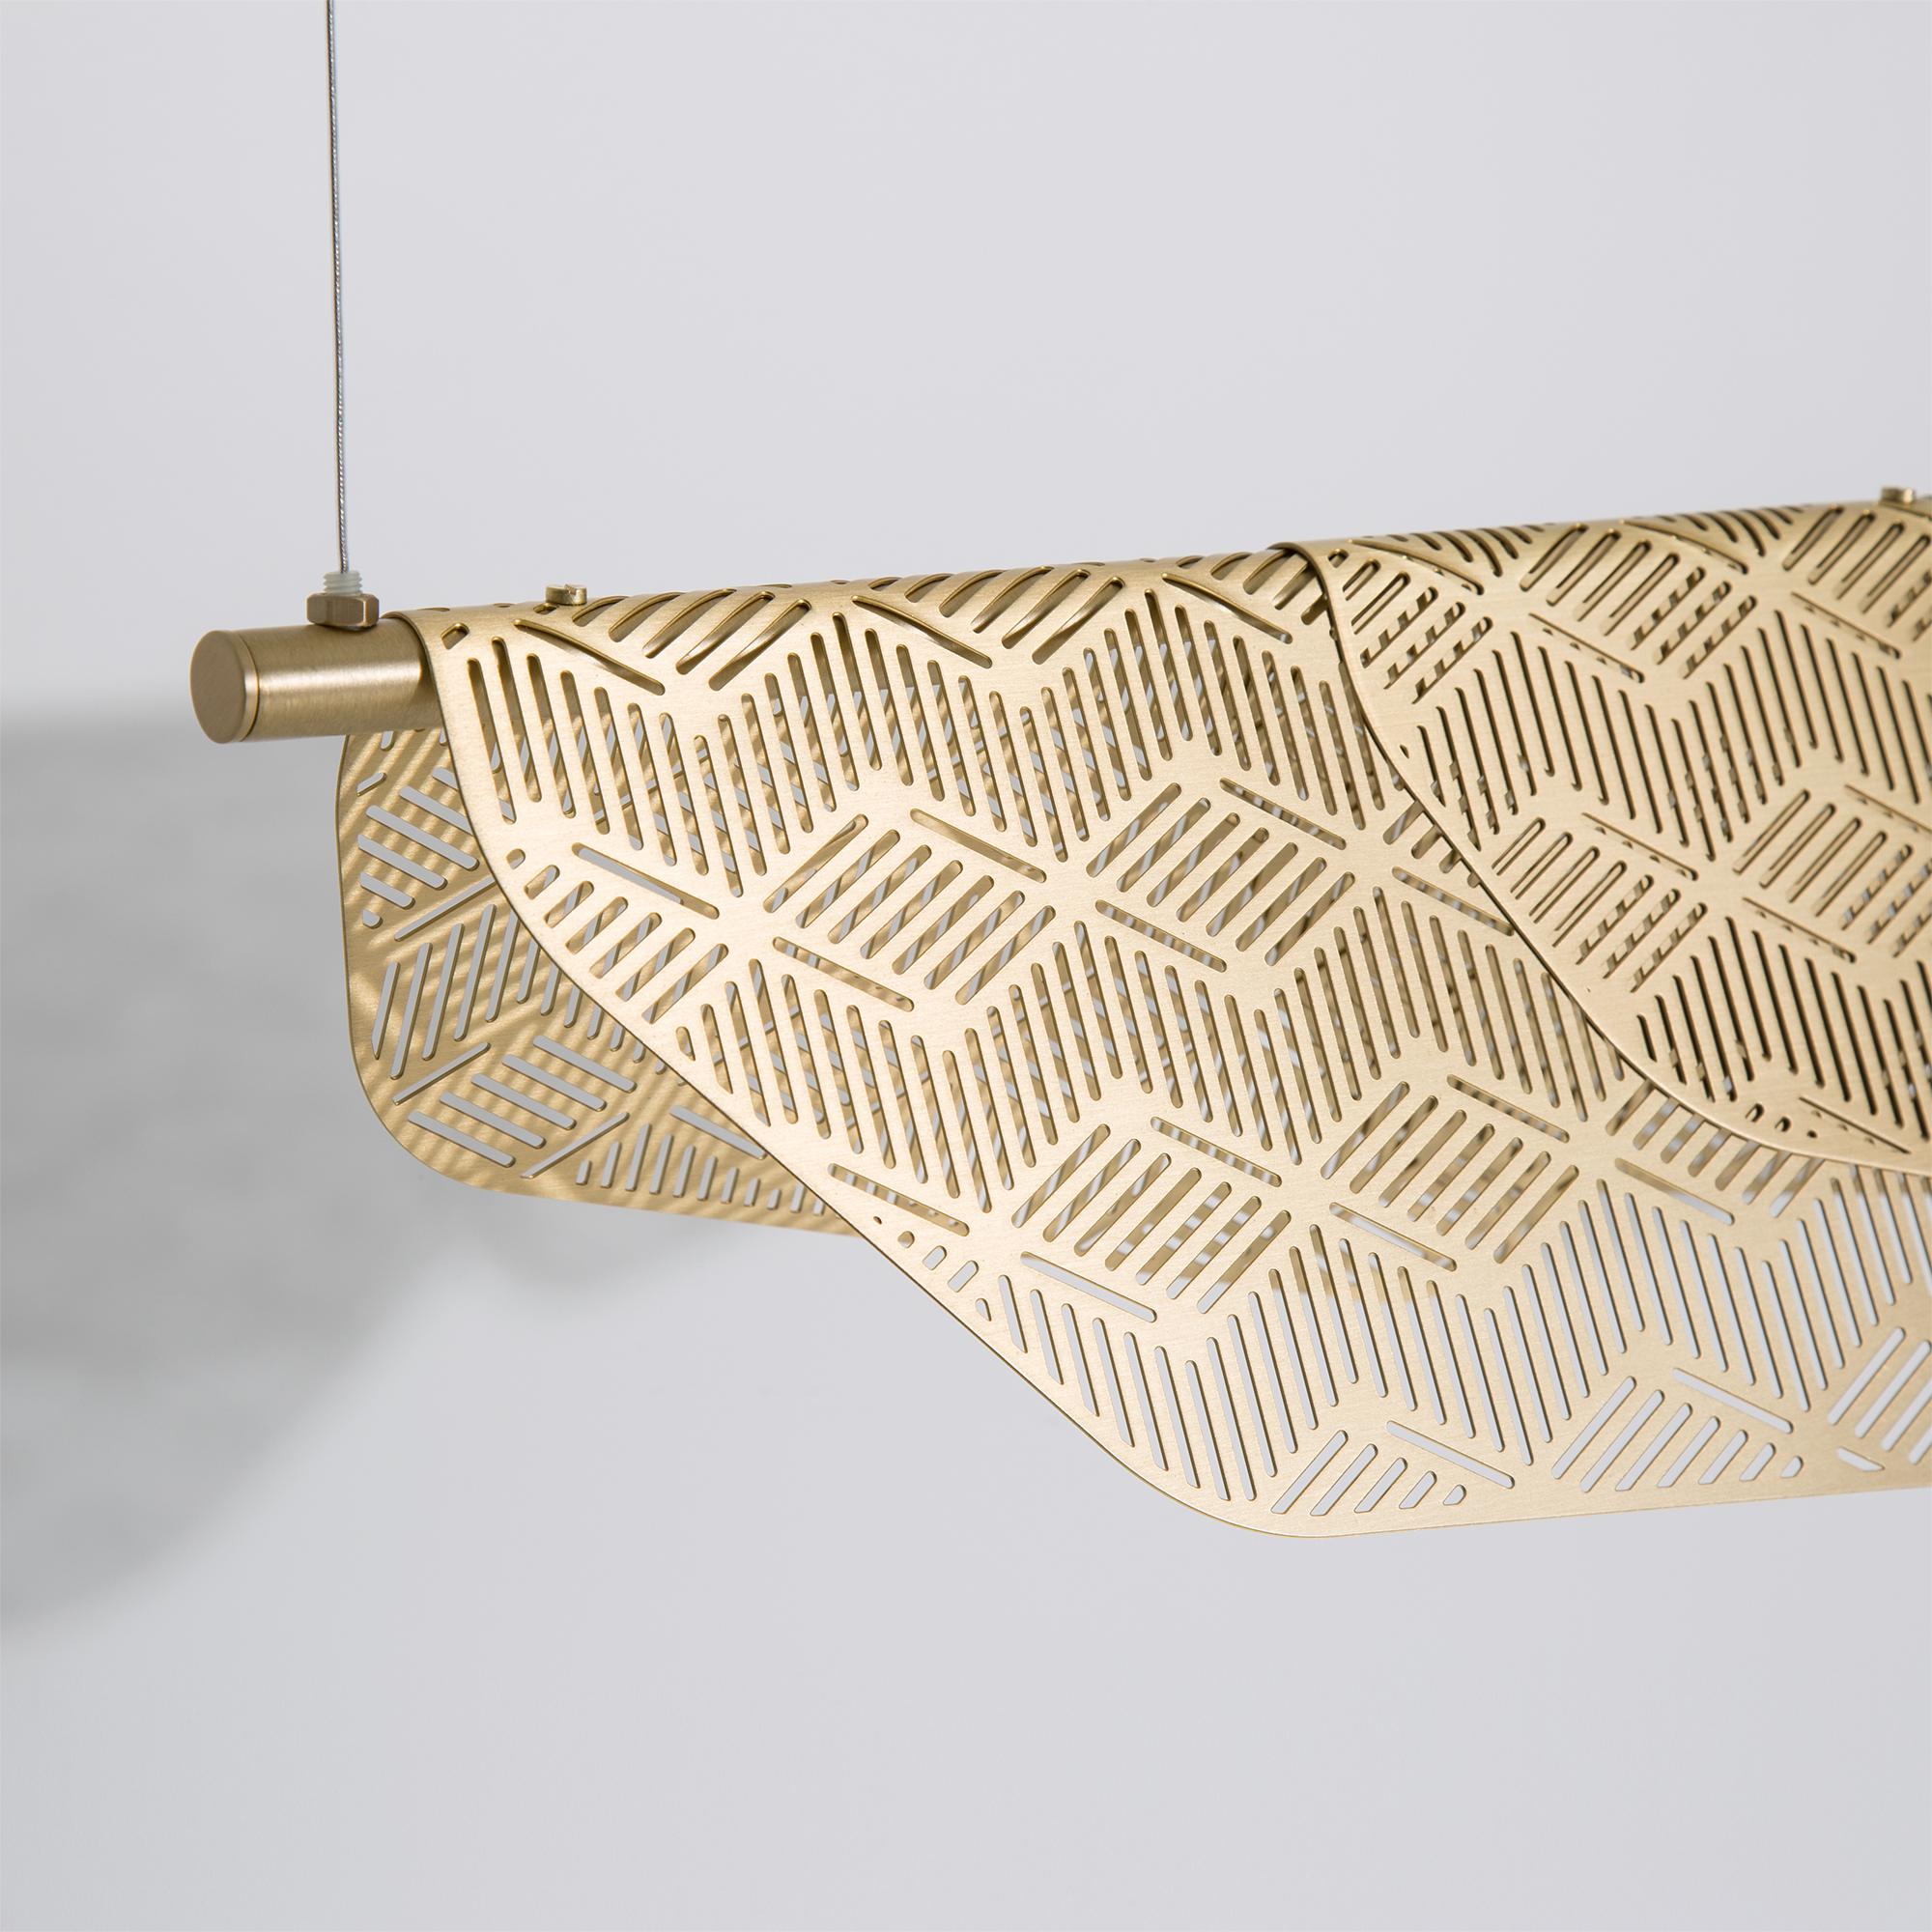 Petite Friture Large Mediterranea Pendant Light in Brushed Brass, 2016 In New Condition For Sale In Brooklyn, NY